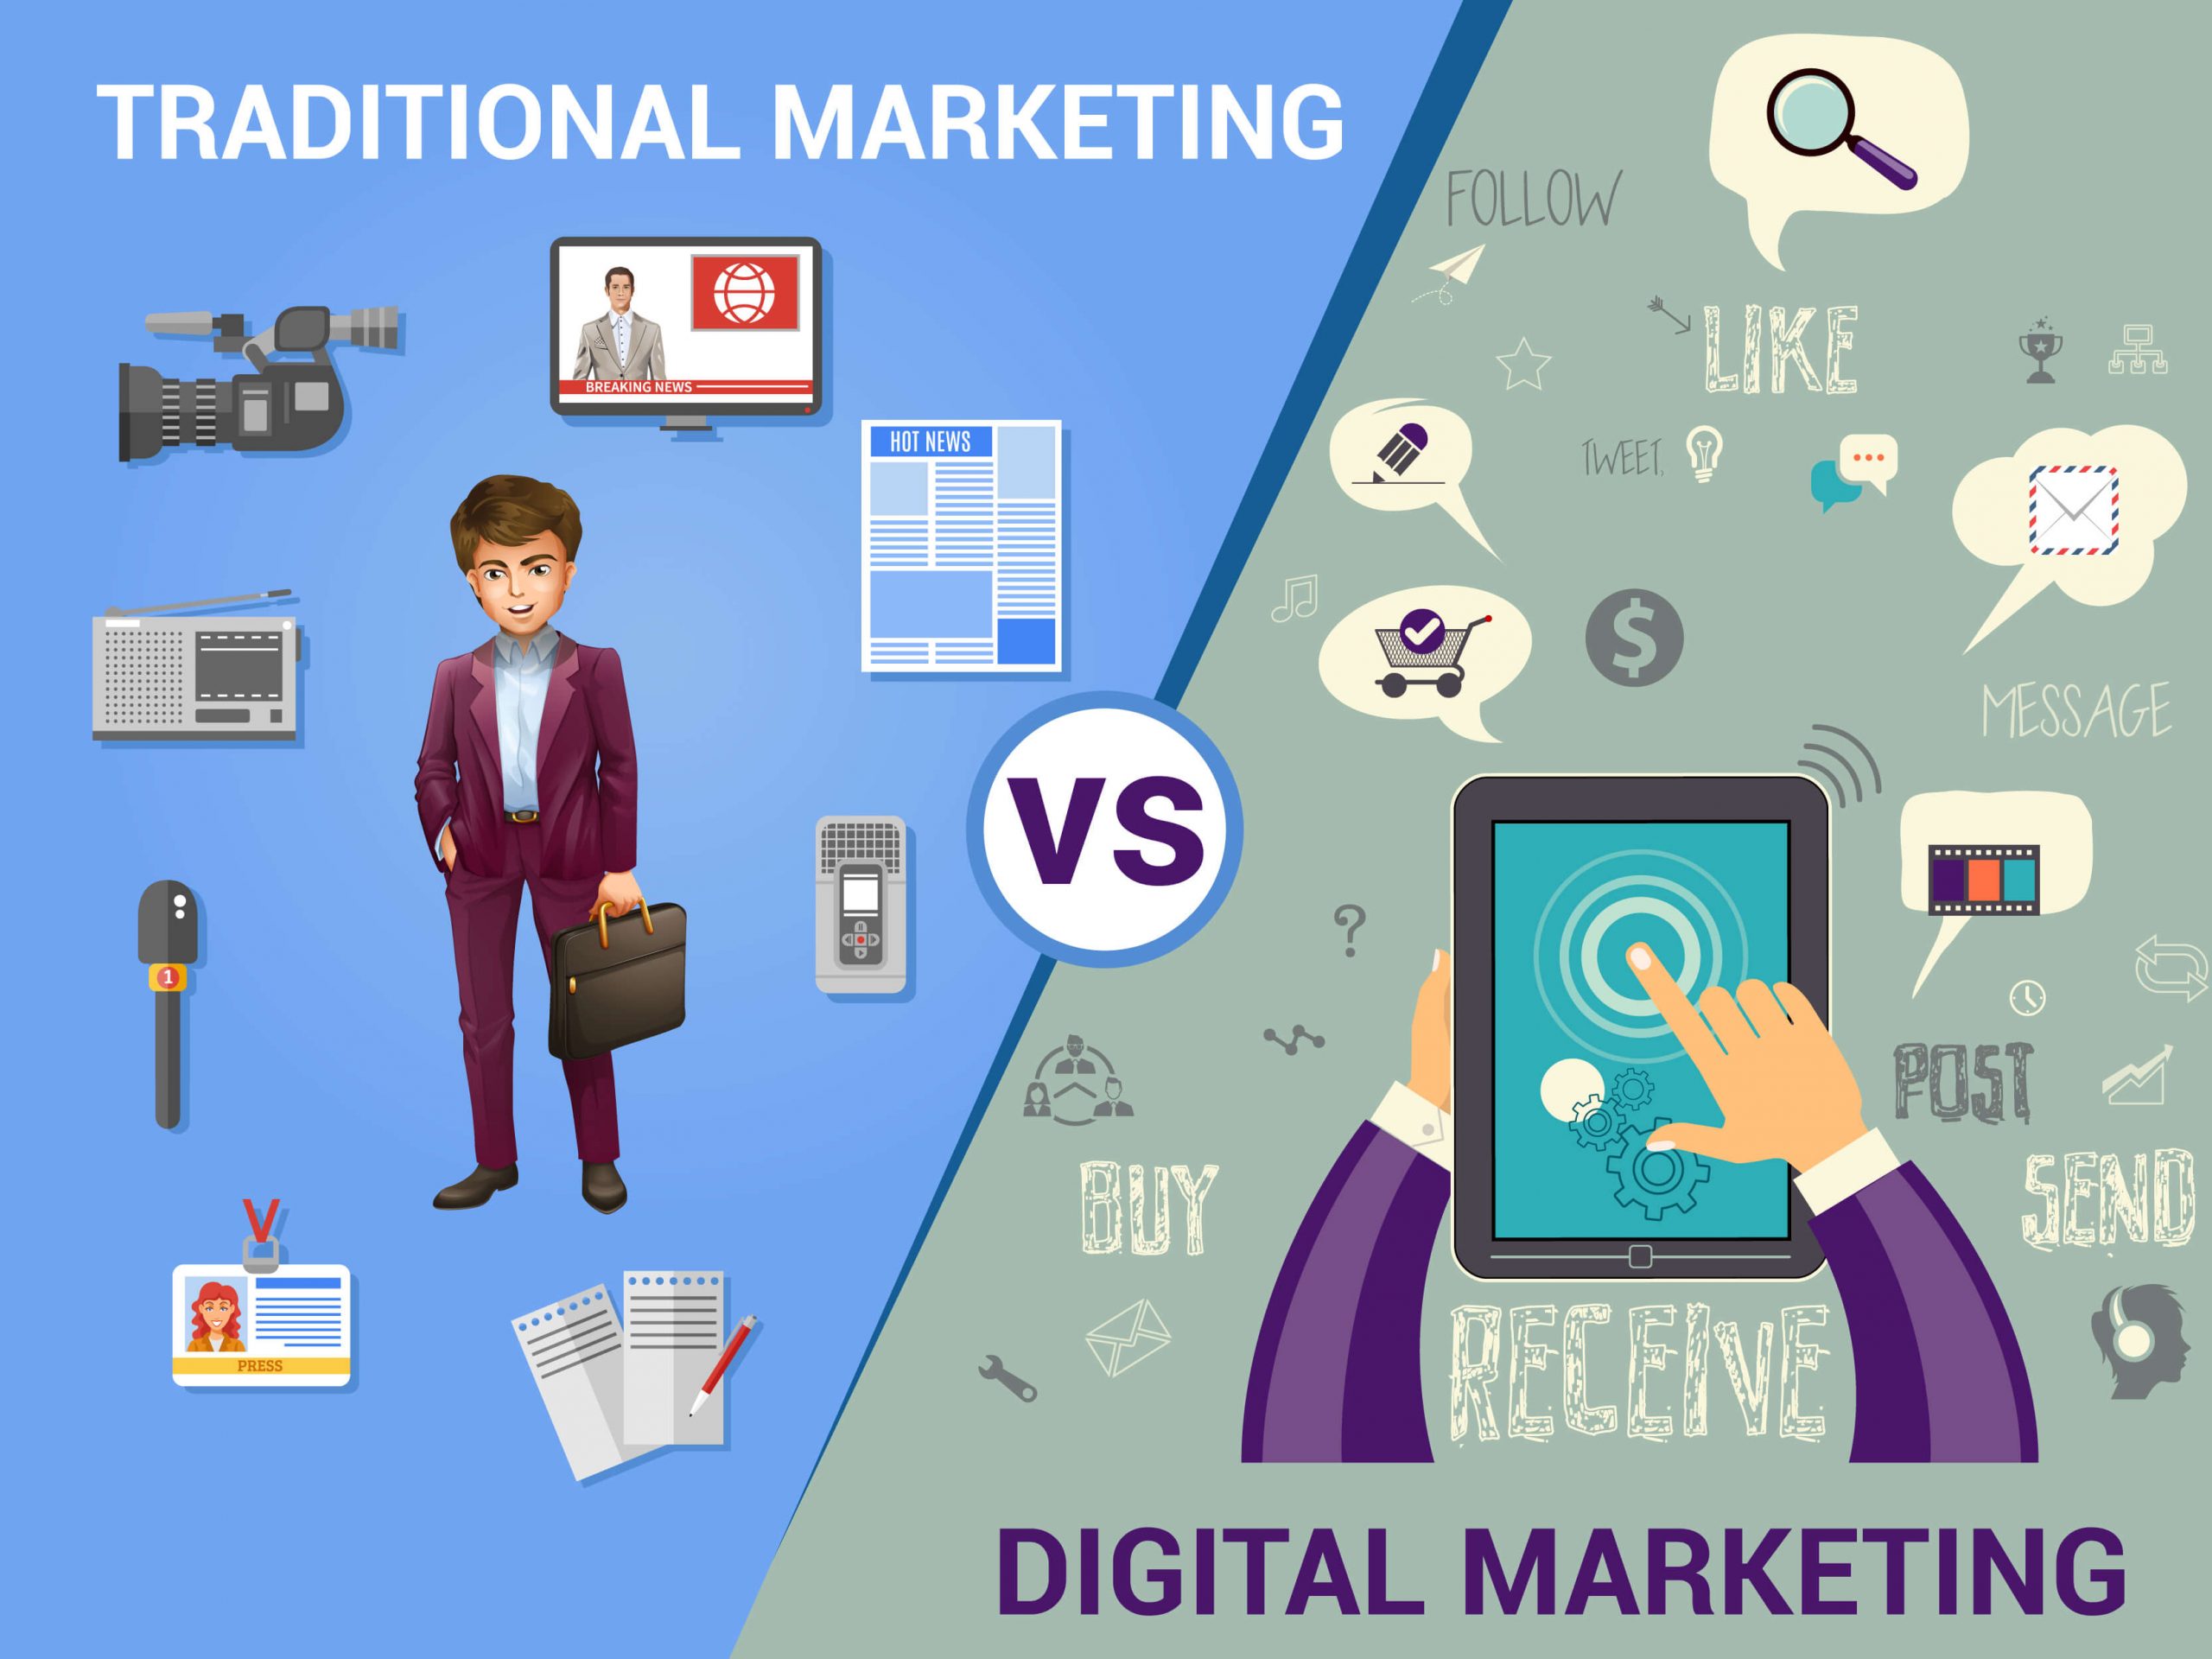 How the traditional marketing mix can assist in your digital marketing efforts